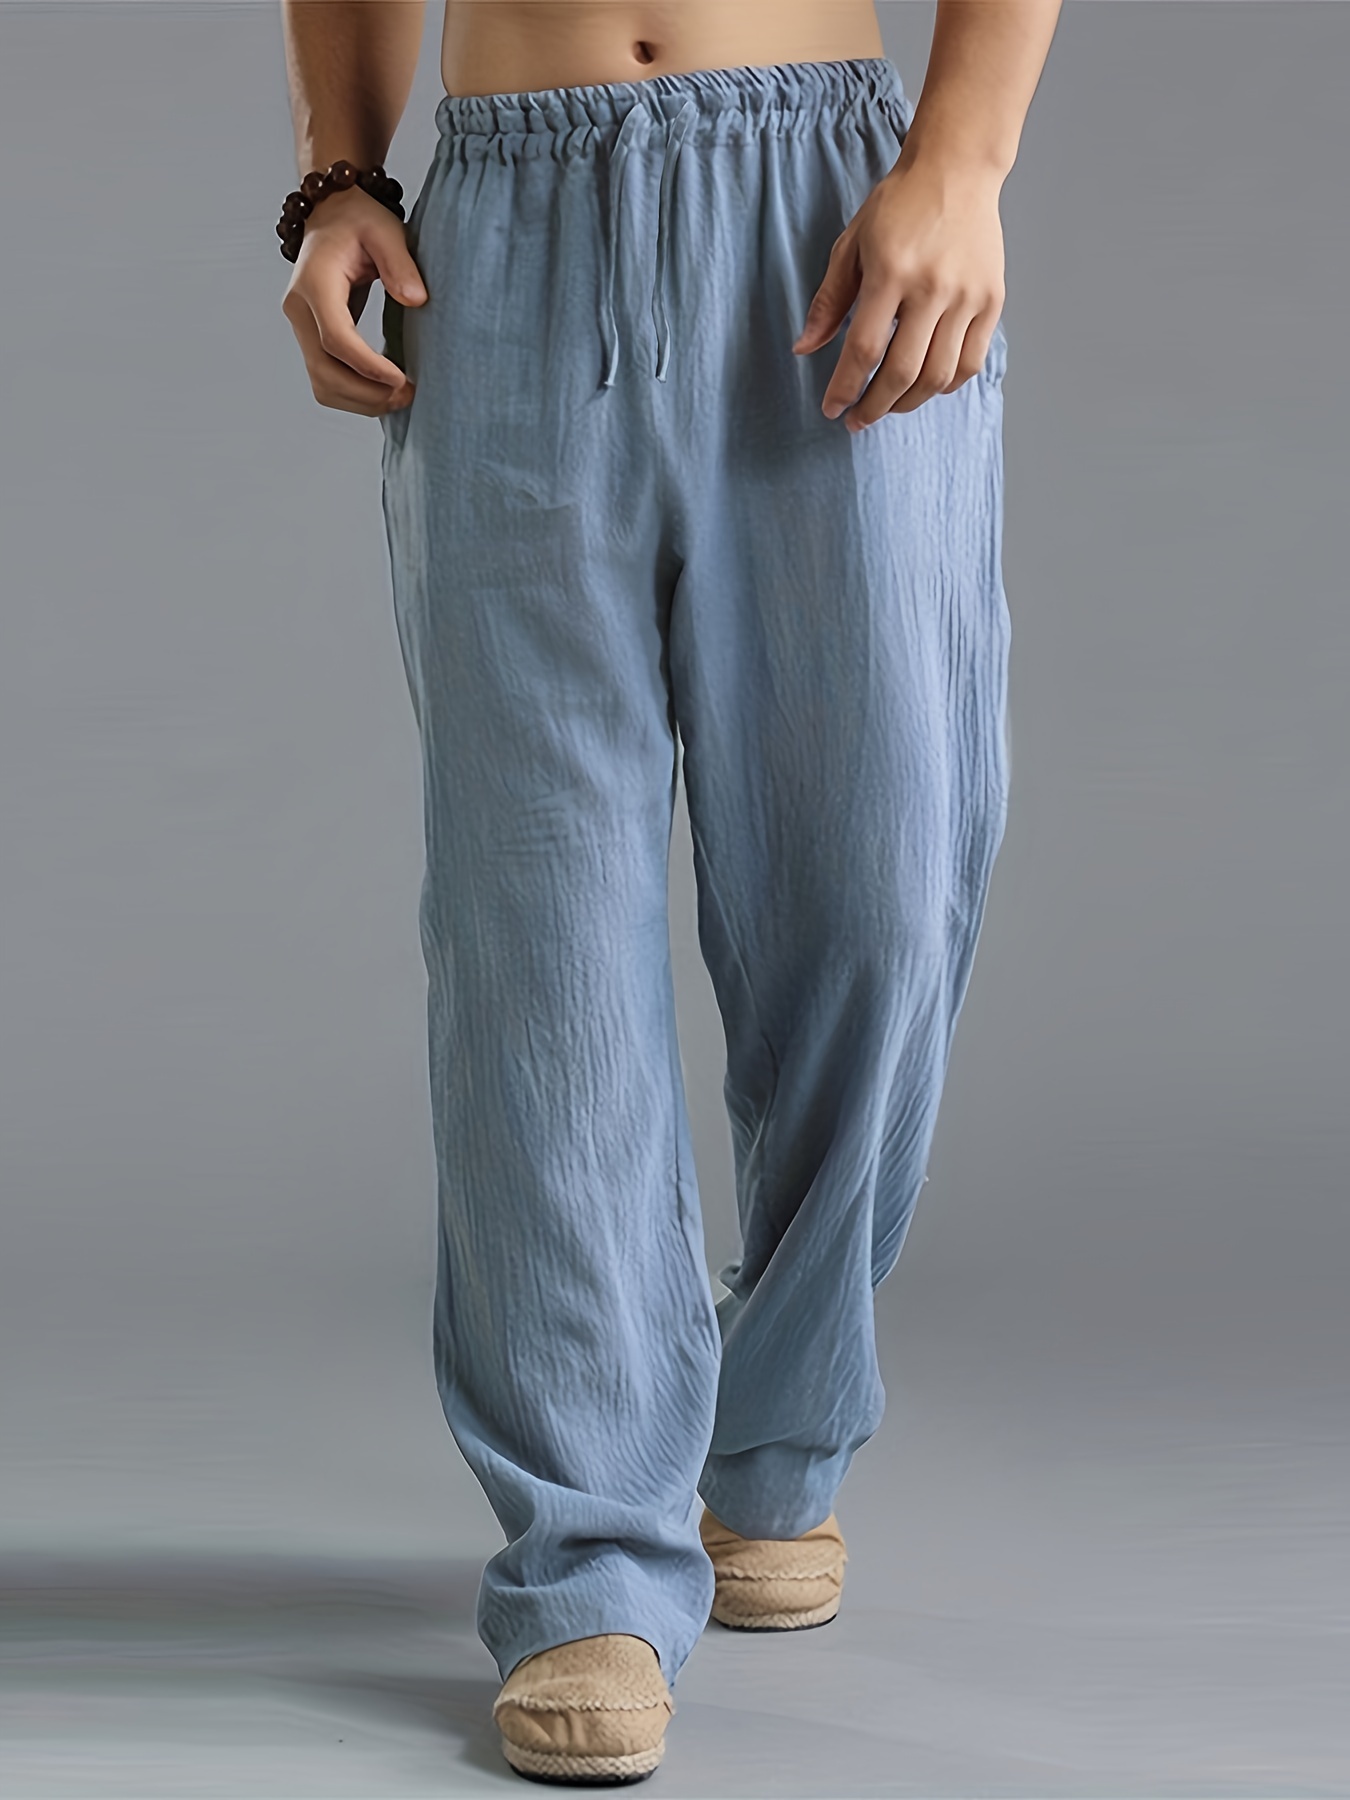 Casual Pants Cotton Linen Female Baggy Trousers with Pocket S-XL Summer  Clothing